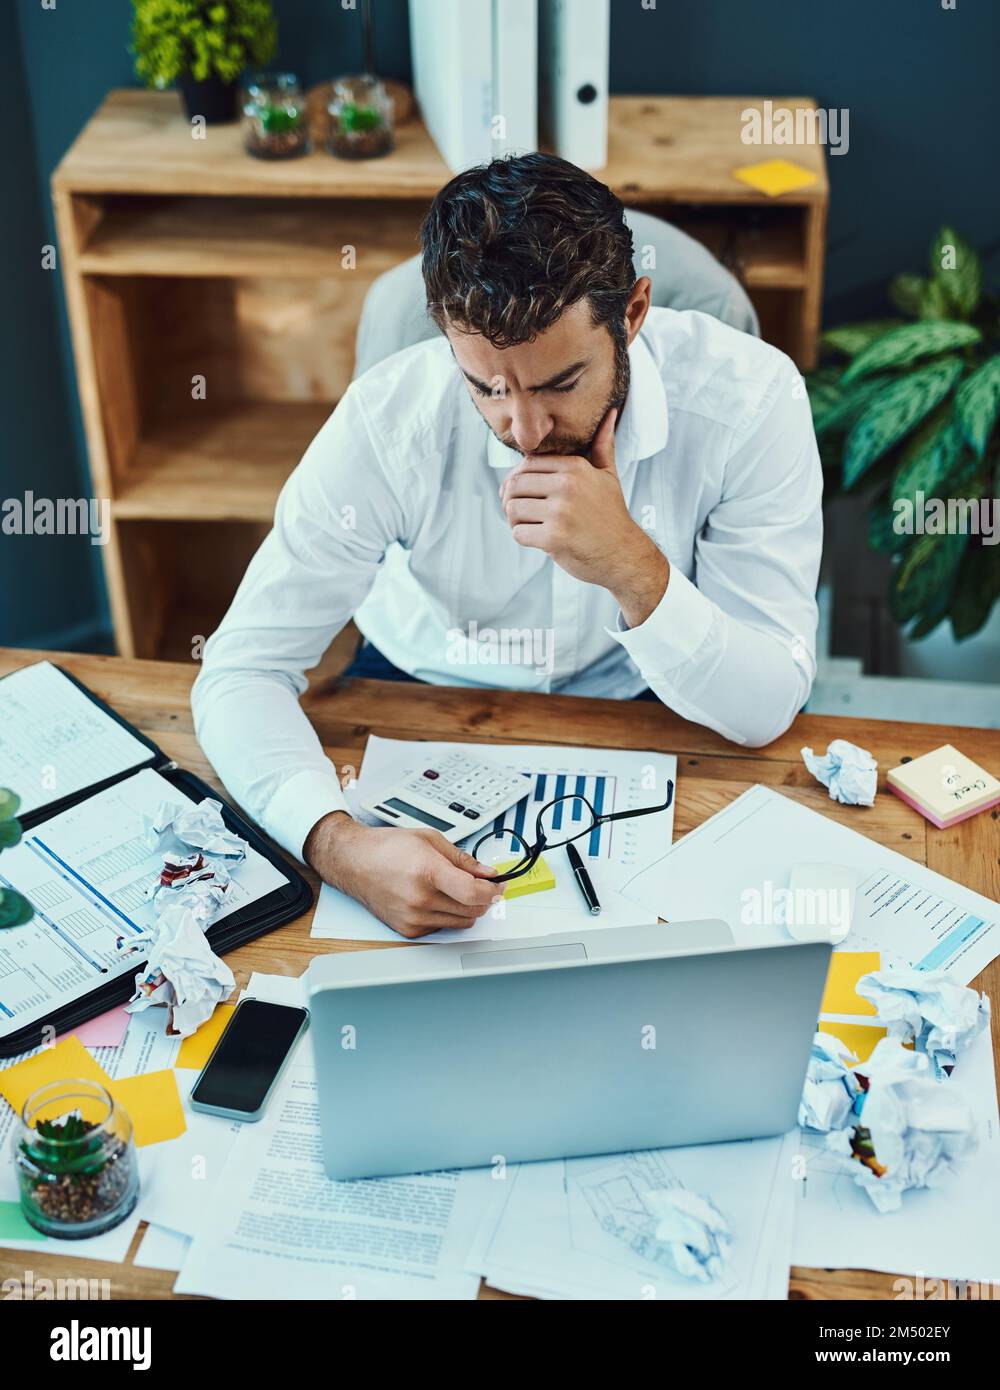 Some problems take longer to tackle. a young businessman looking serious while working on a laptop in an office. Stock Photo